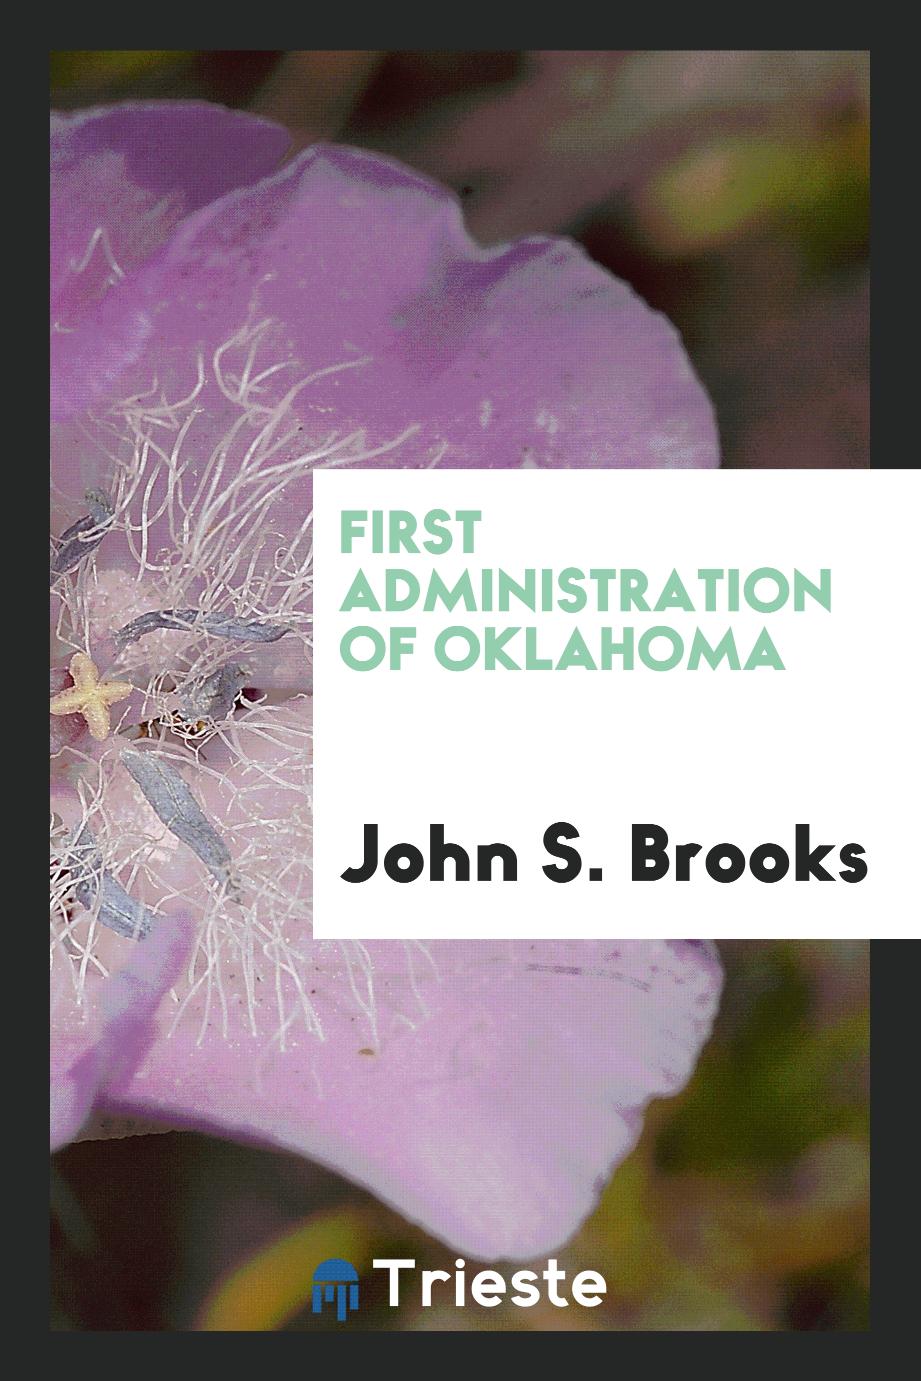 First administration of Oklahoma